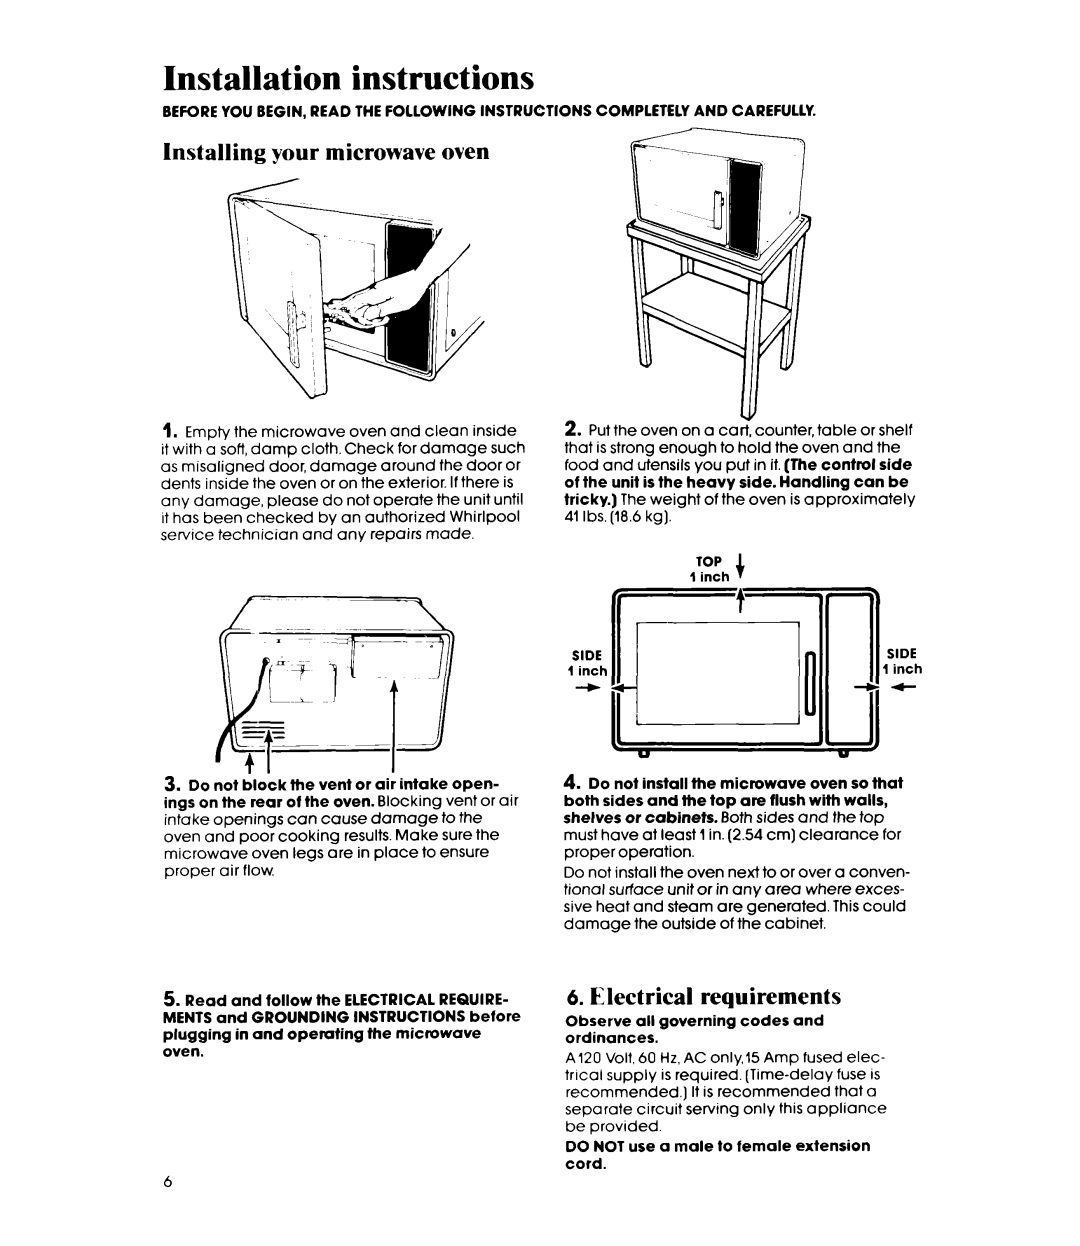 Whirlpool MW3200XM manual Installation instructions, Installing your microwave oven, Electrical requirements 